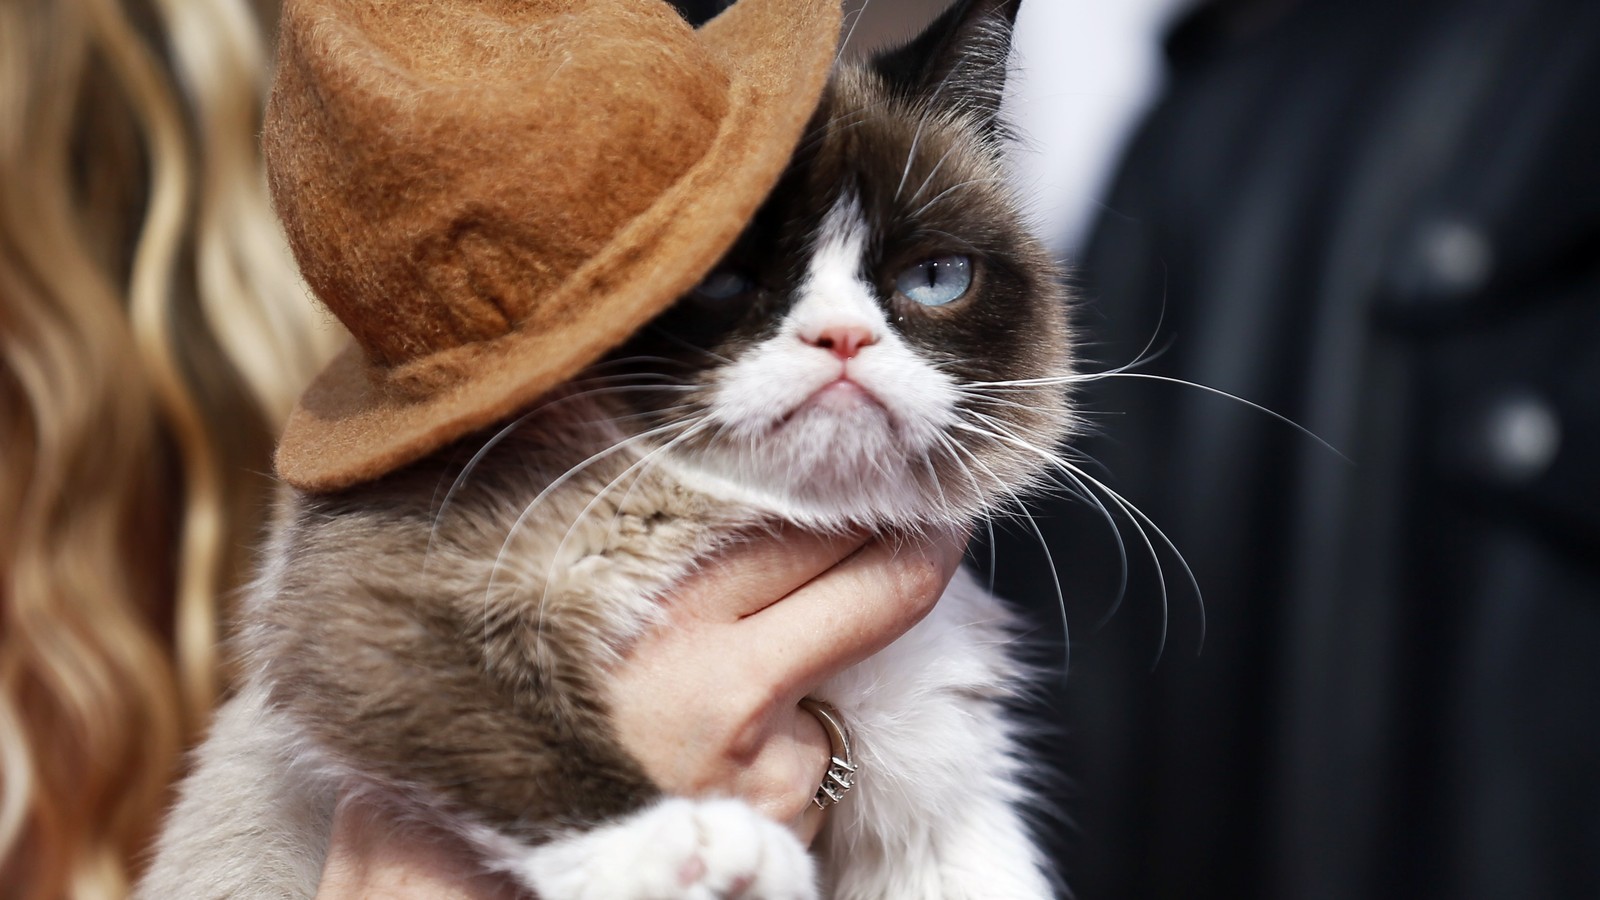 Grumpy Cat's Worst Christmas Ever, Channel Awesome